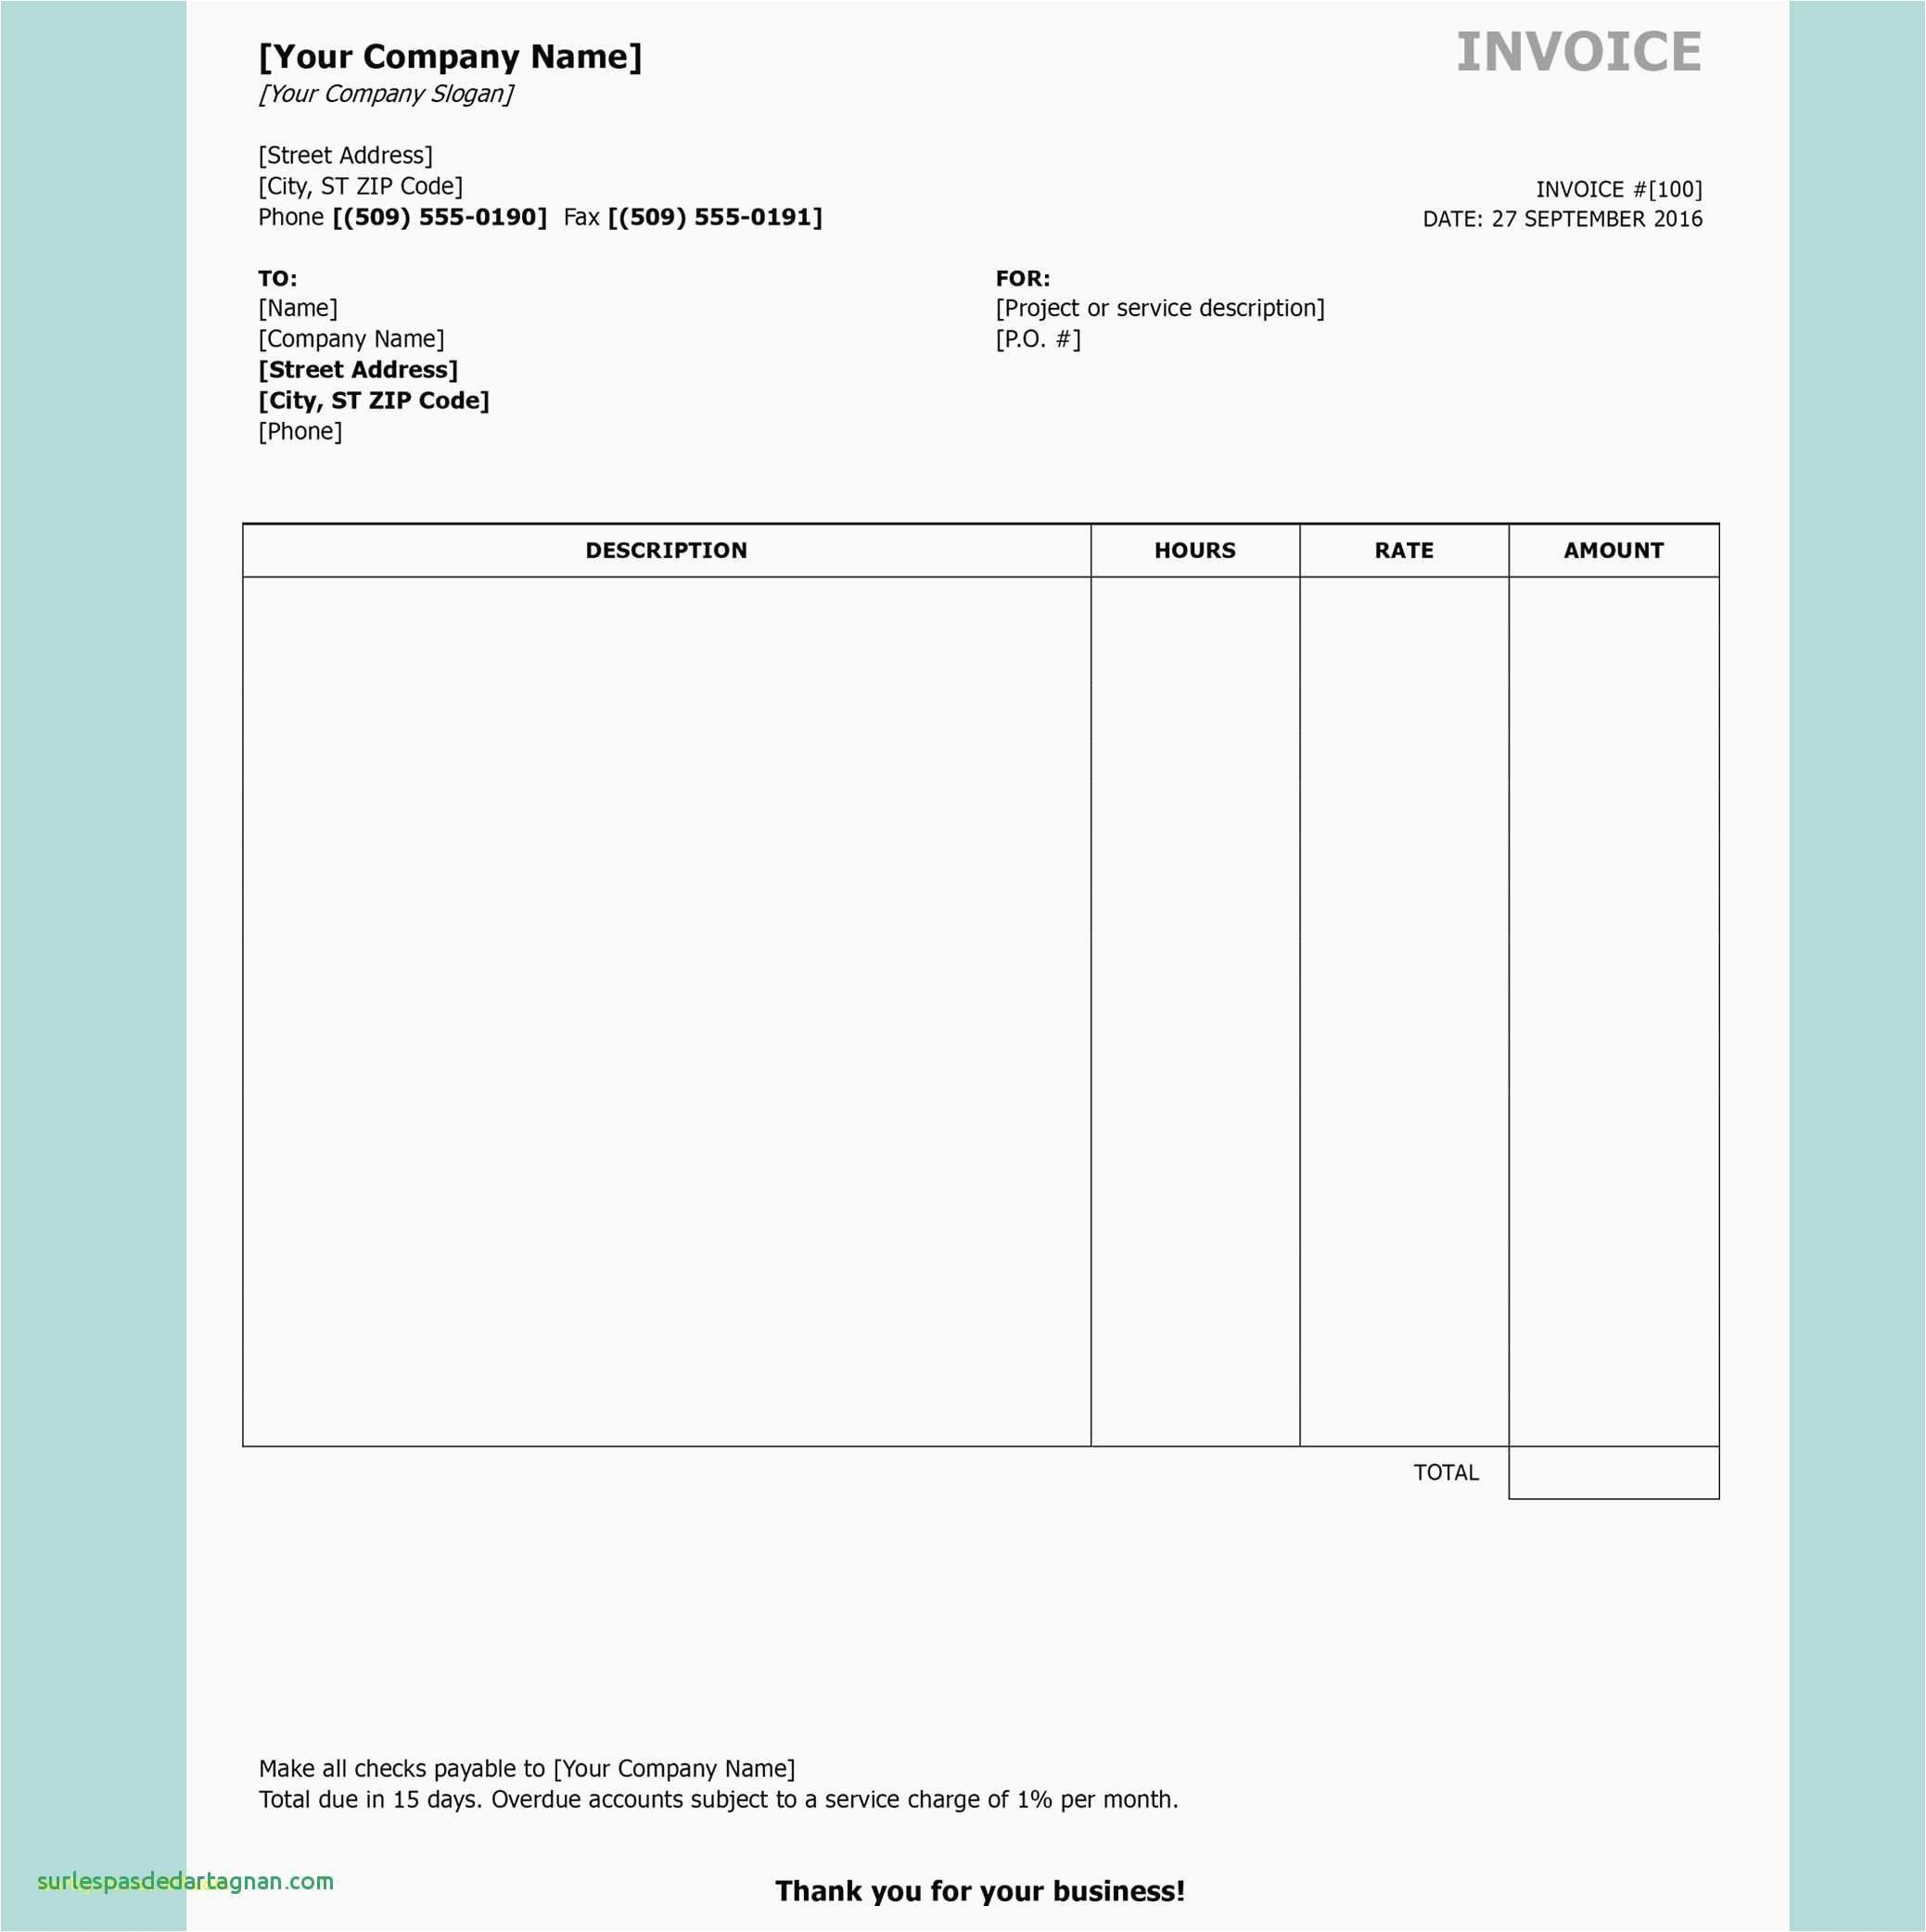 022 invoice template on word sample document free wordpad best invoice template for word